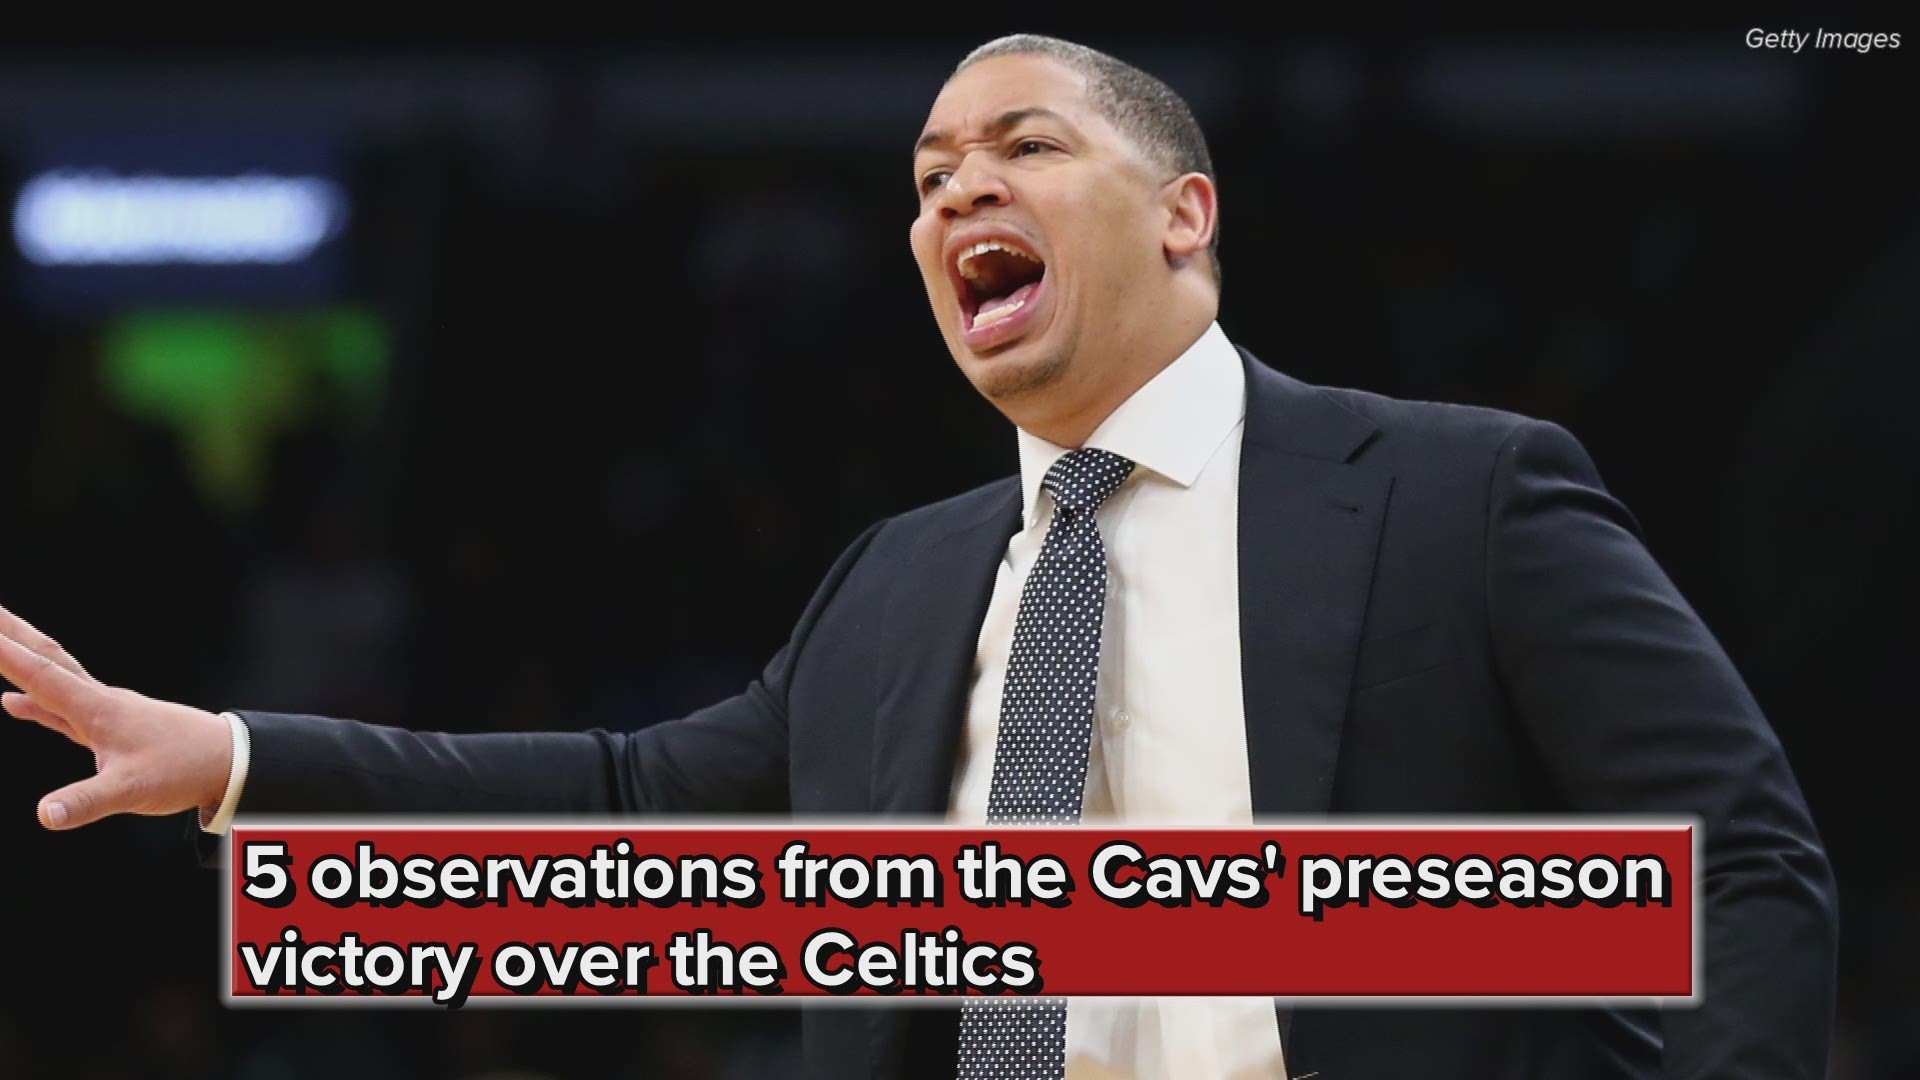 5 observations from the Cleveland Cavaliers' preseason victory vs. the Boston Celtics